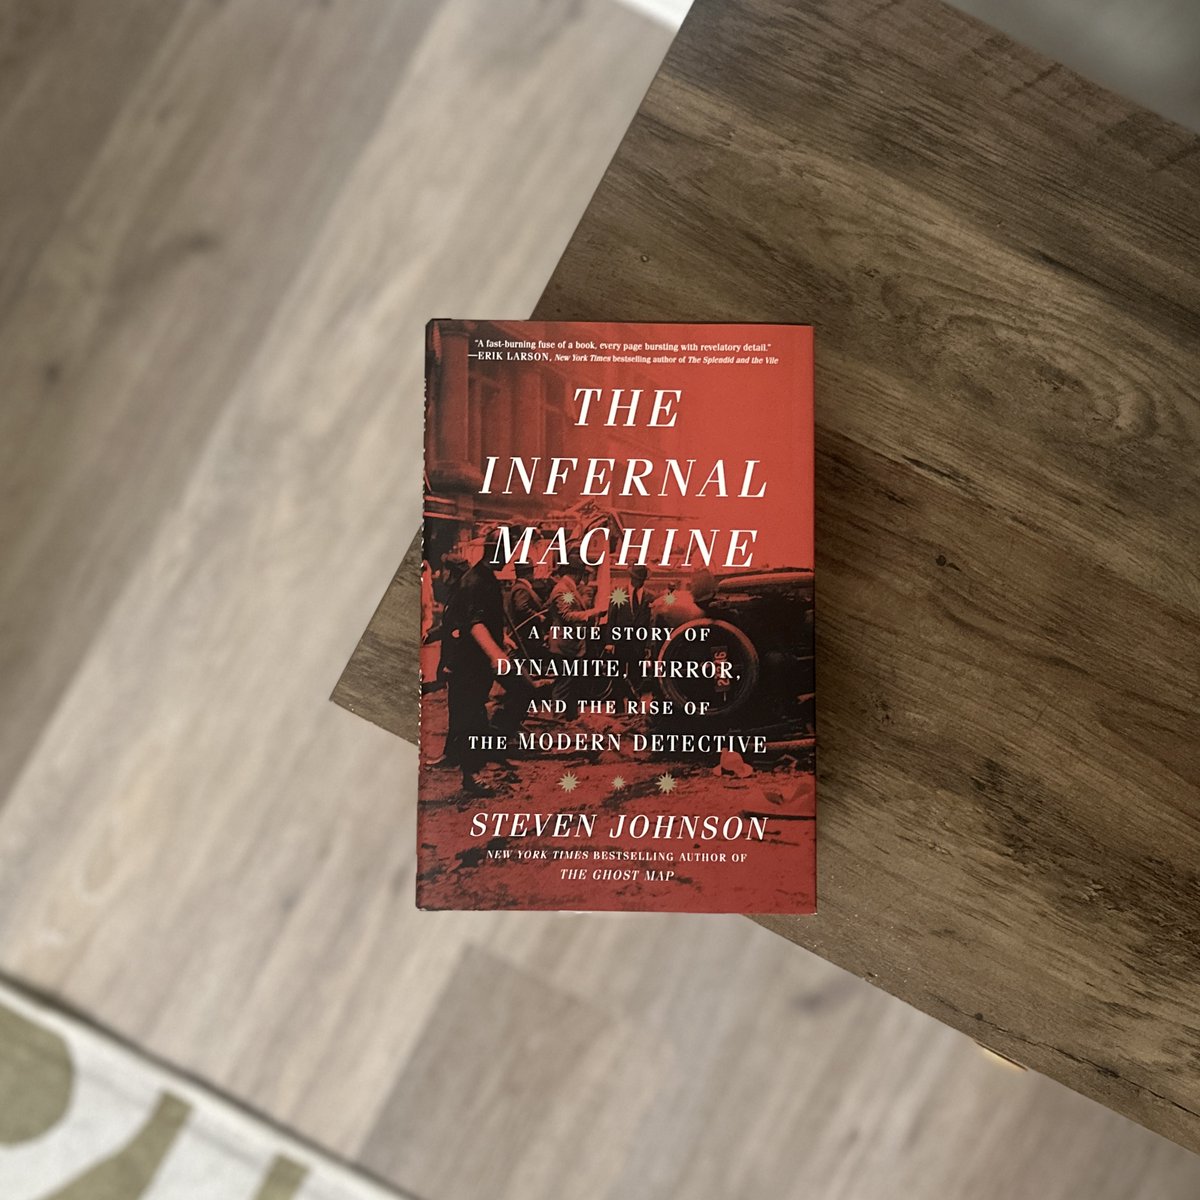 In THE INFERNAL MACHINE, @stevenbjohnson reveals a mostly forgotten period of history—featuring scientific discovery, assassination plots, bombings, undercover operations, and innovative sleuthing. THE INFERNAL MACHINE is out now—learn more at the link. penguinrandomhouse.com/books/715495/t…